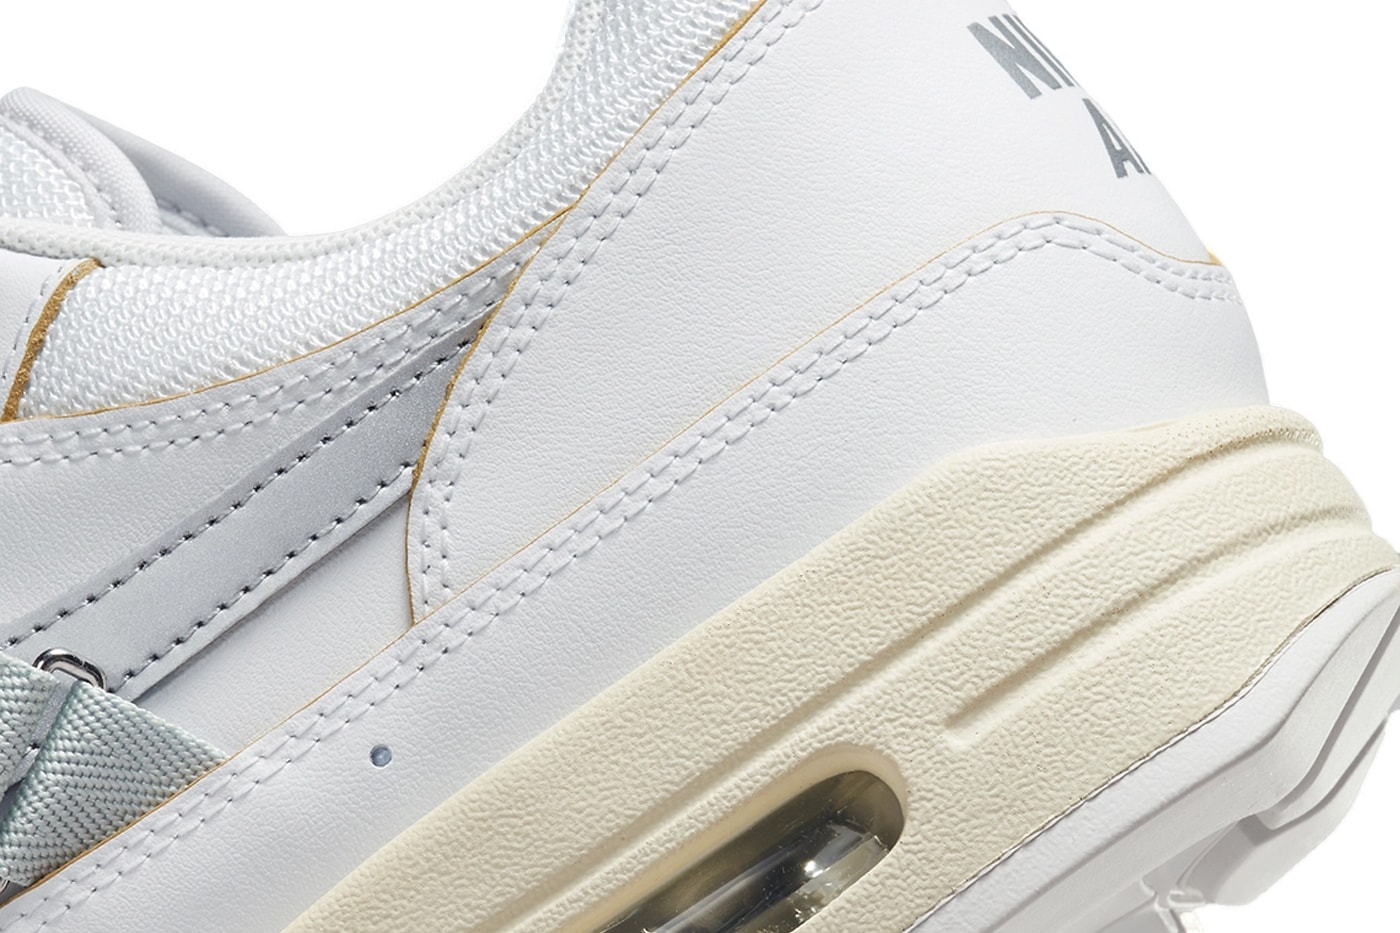 Nike Air Max 1 Timeless white tinker hatfield thick strap sunburst release info date price